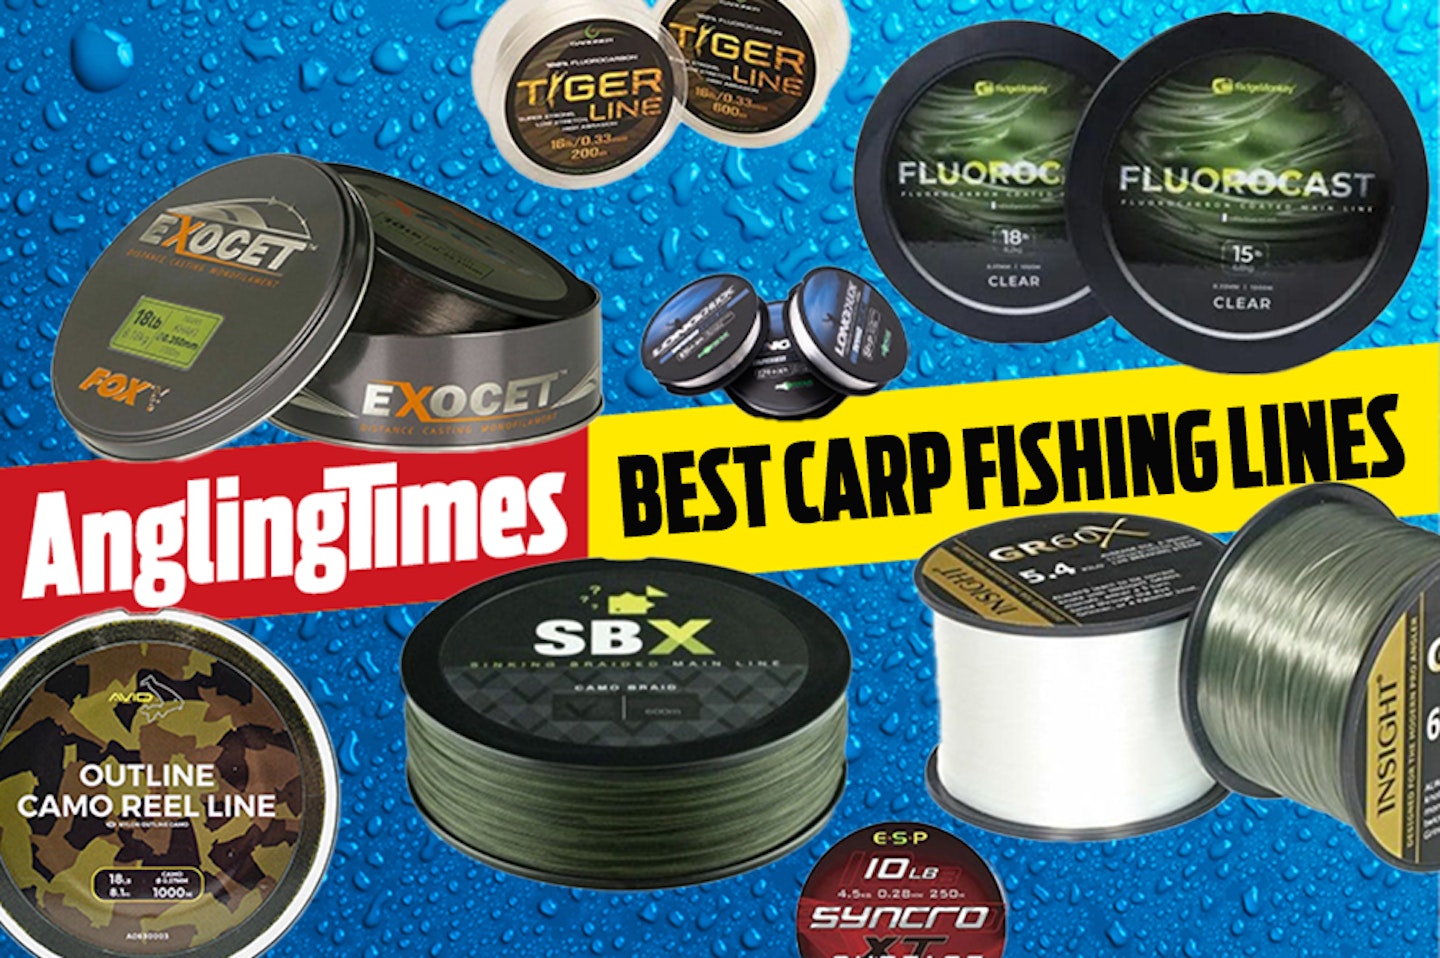 Lead Free Leaders for Carp fishing - Which one for you?! Fox Vs Ridgemonkey  